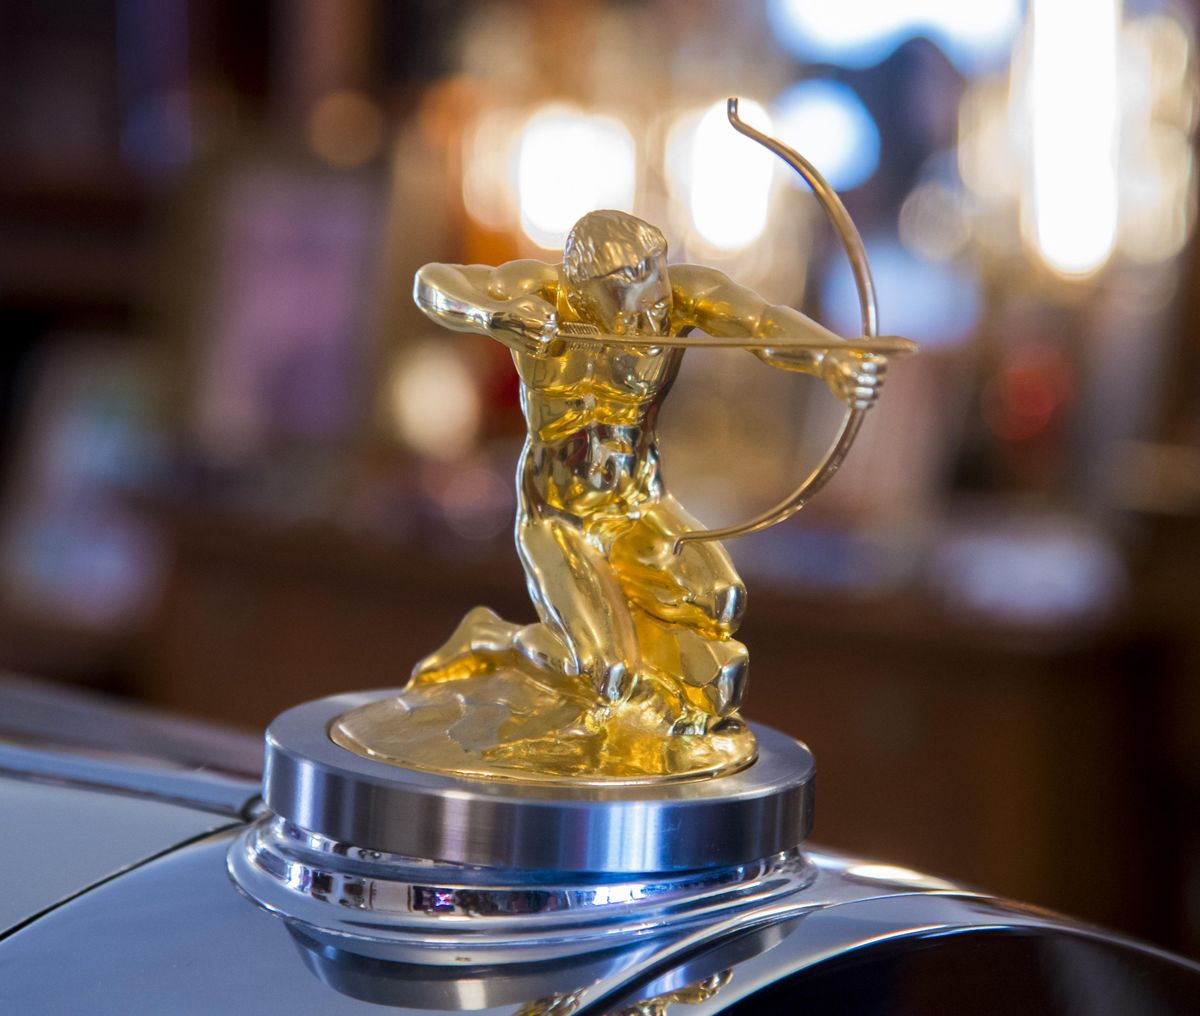 The hood ornament of Don Fries’ rare, restored 1931 Pierce-Arrow convertible. (Colin Mulvany / The Spokesman-Review)